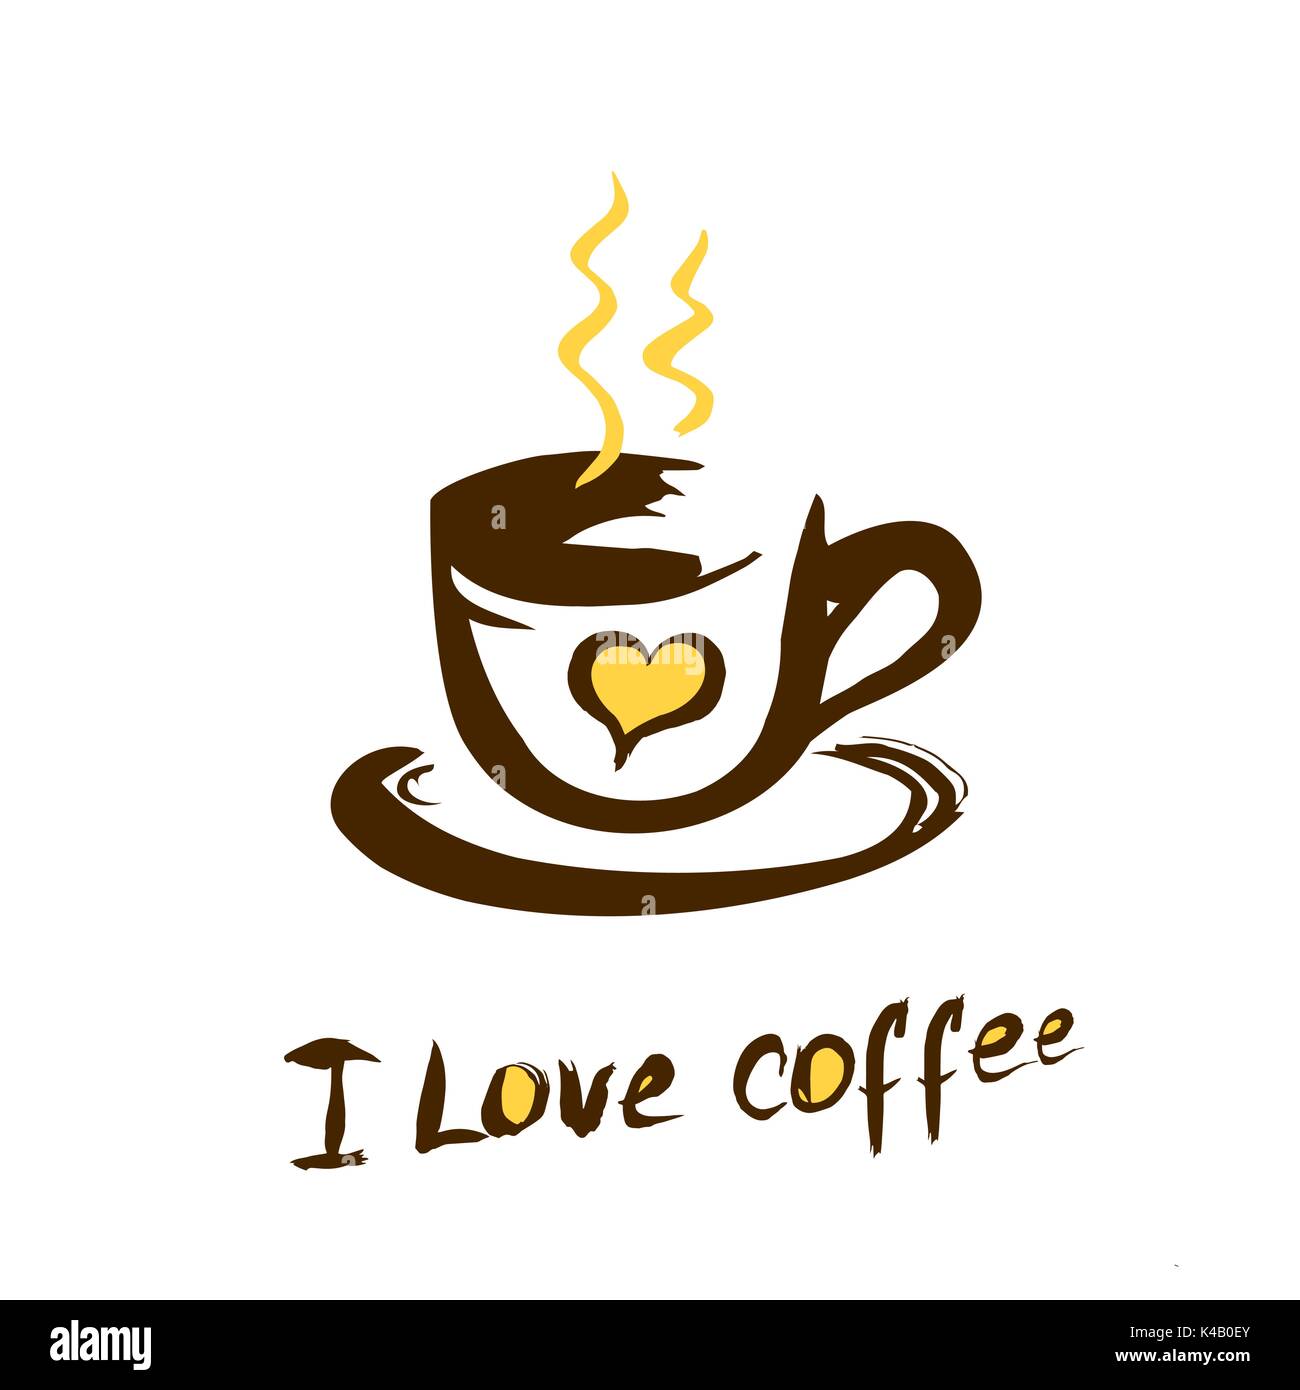 Hand drawn I love coffee  illustration, logo or poster - vector Stock Vector